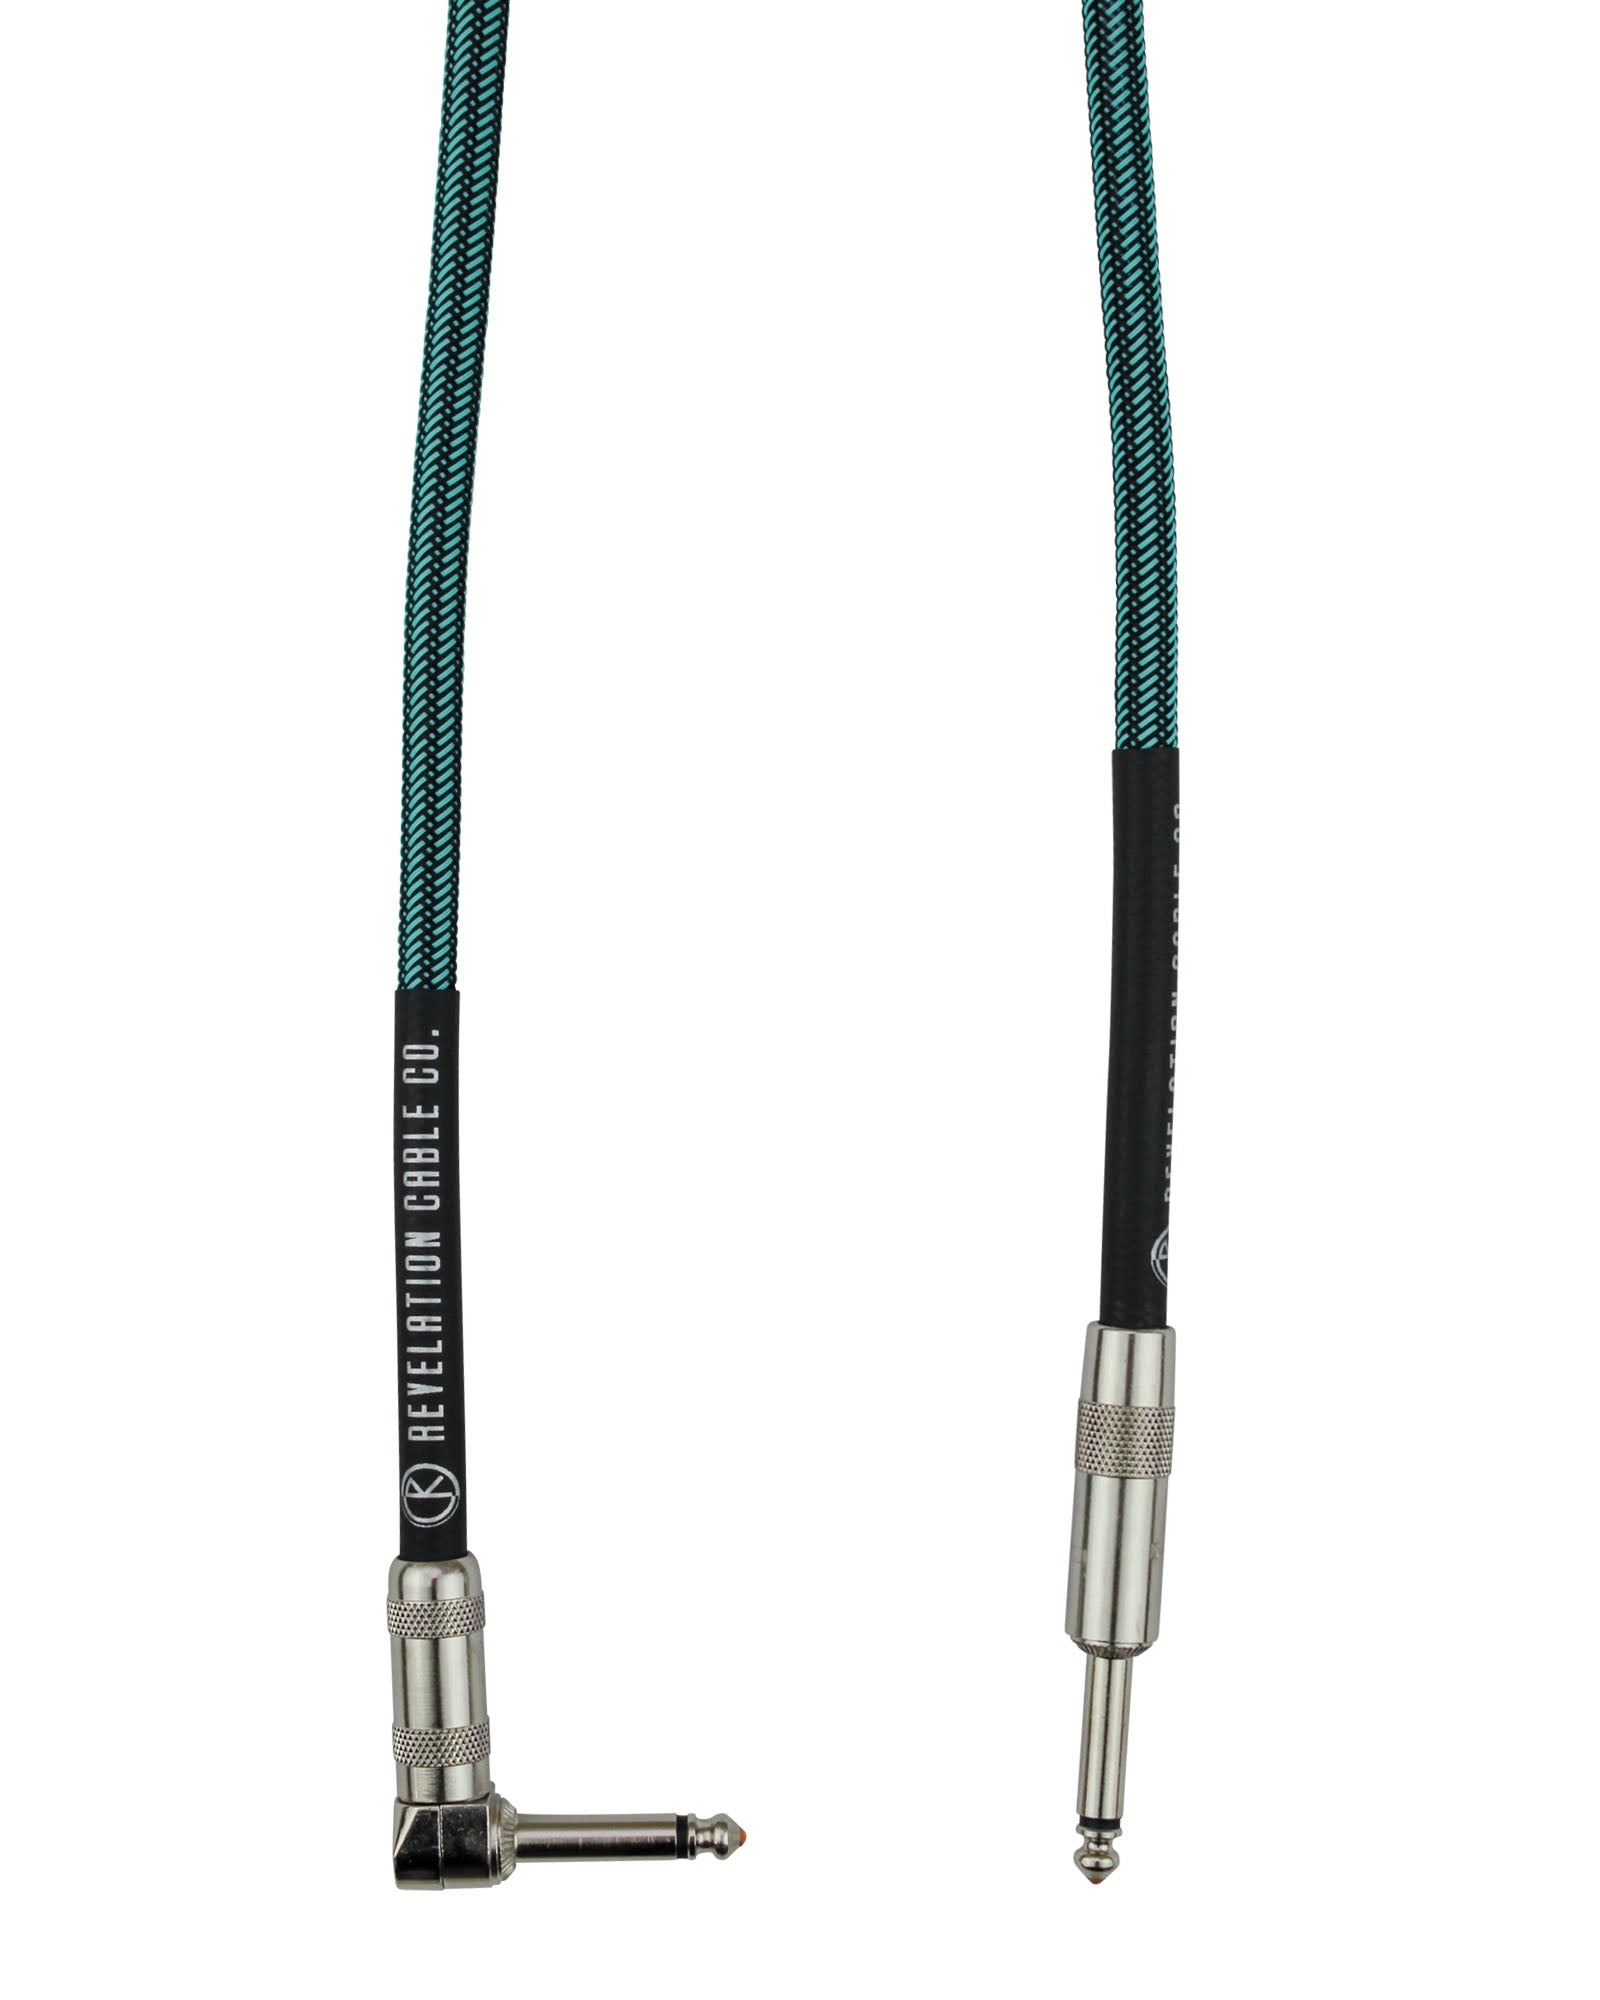 Revelation Cable Co. Turquoise Tweed 10' Premium Instrument Cable